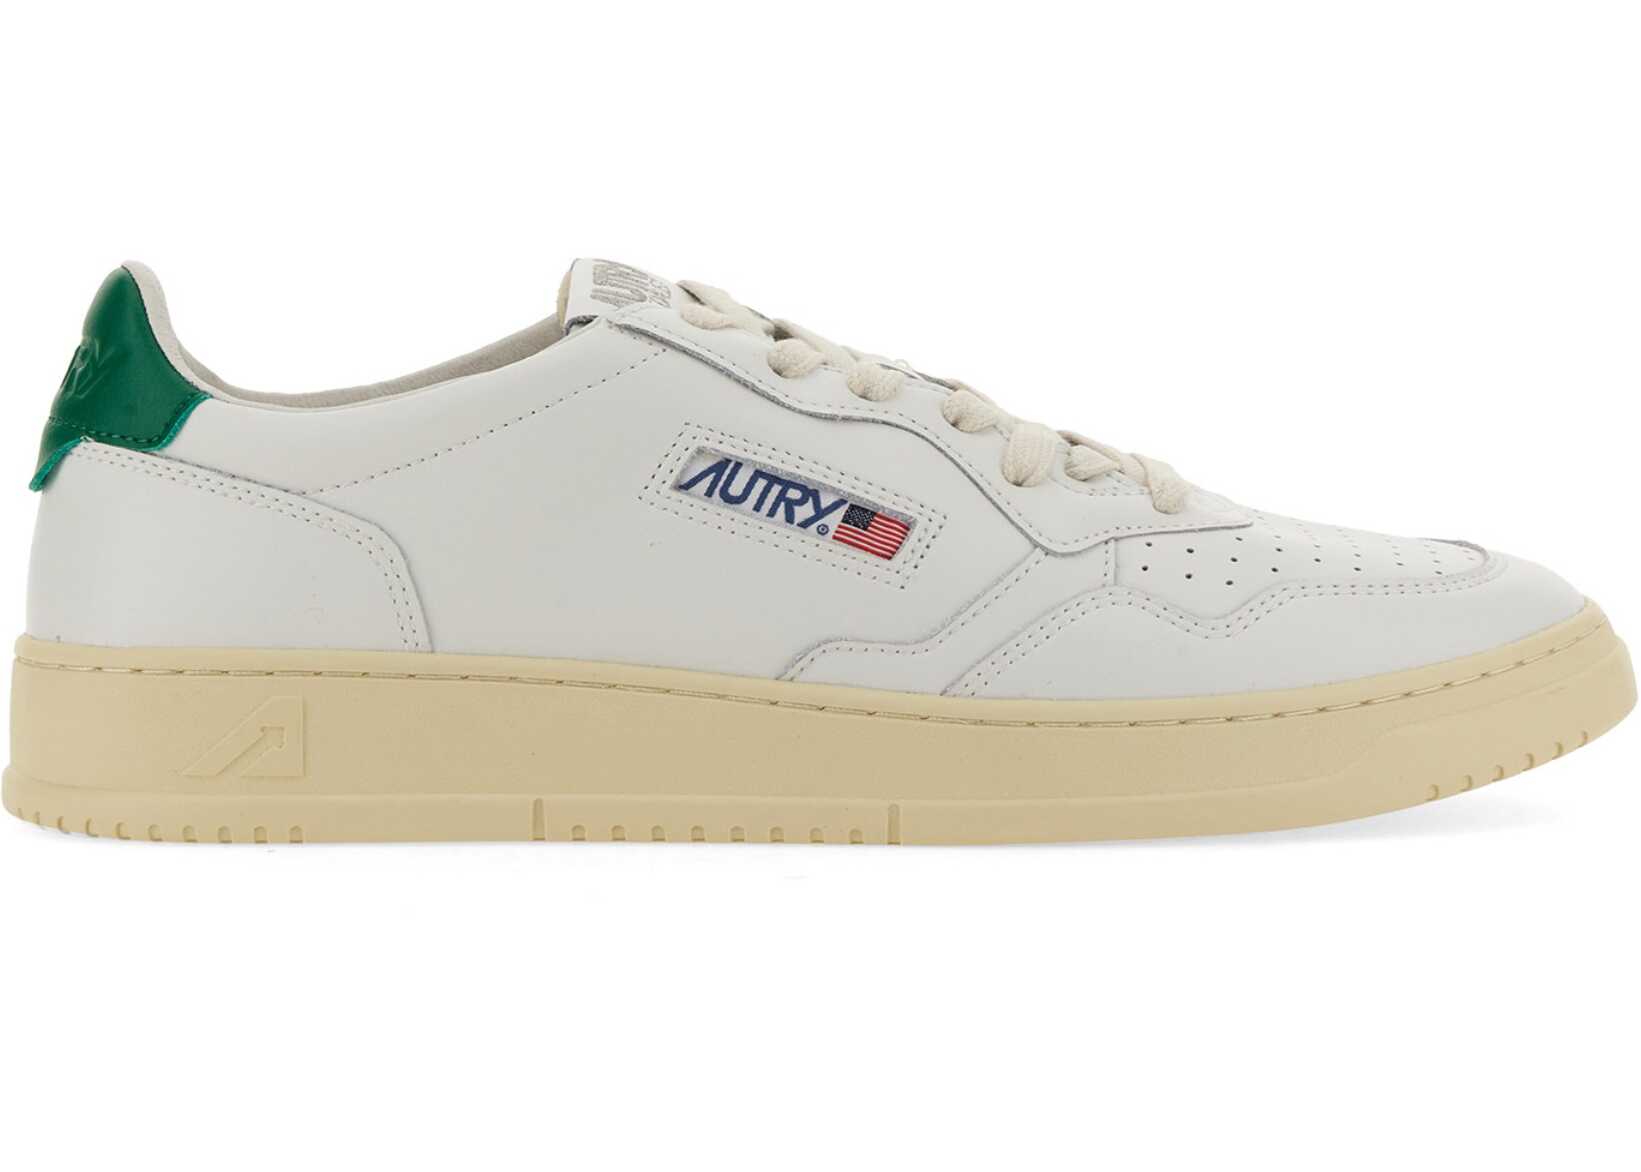 AUTRY Medalist Low Sneaker WHITE